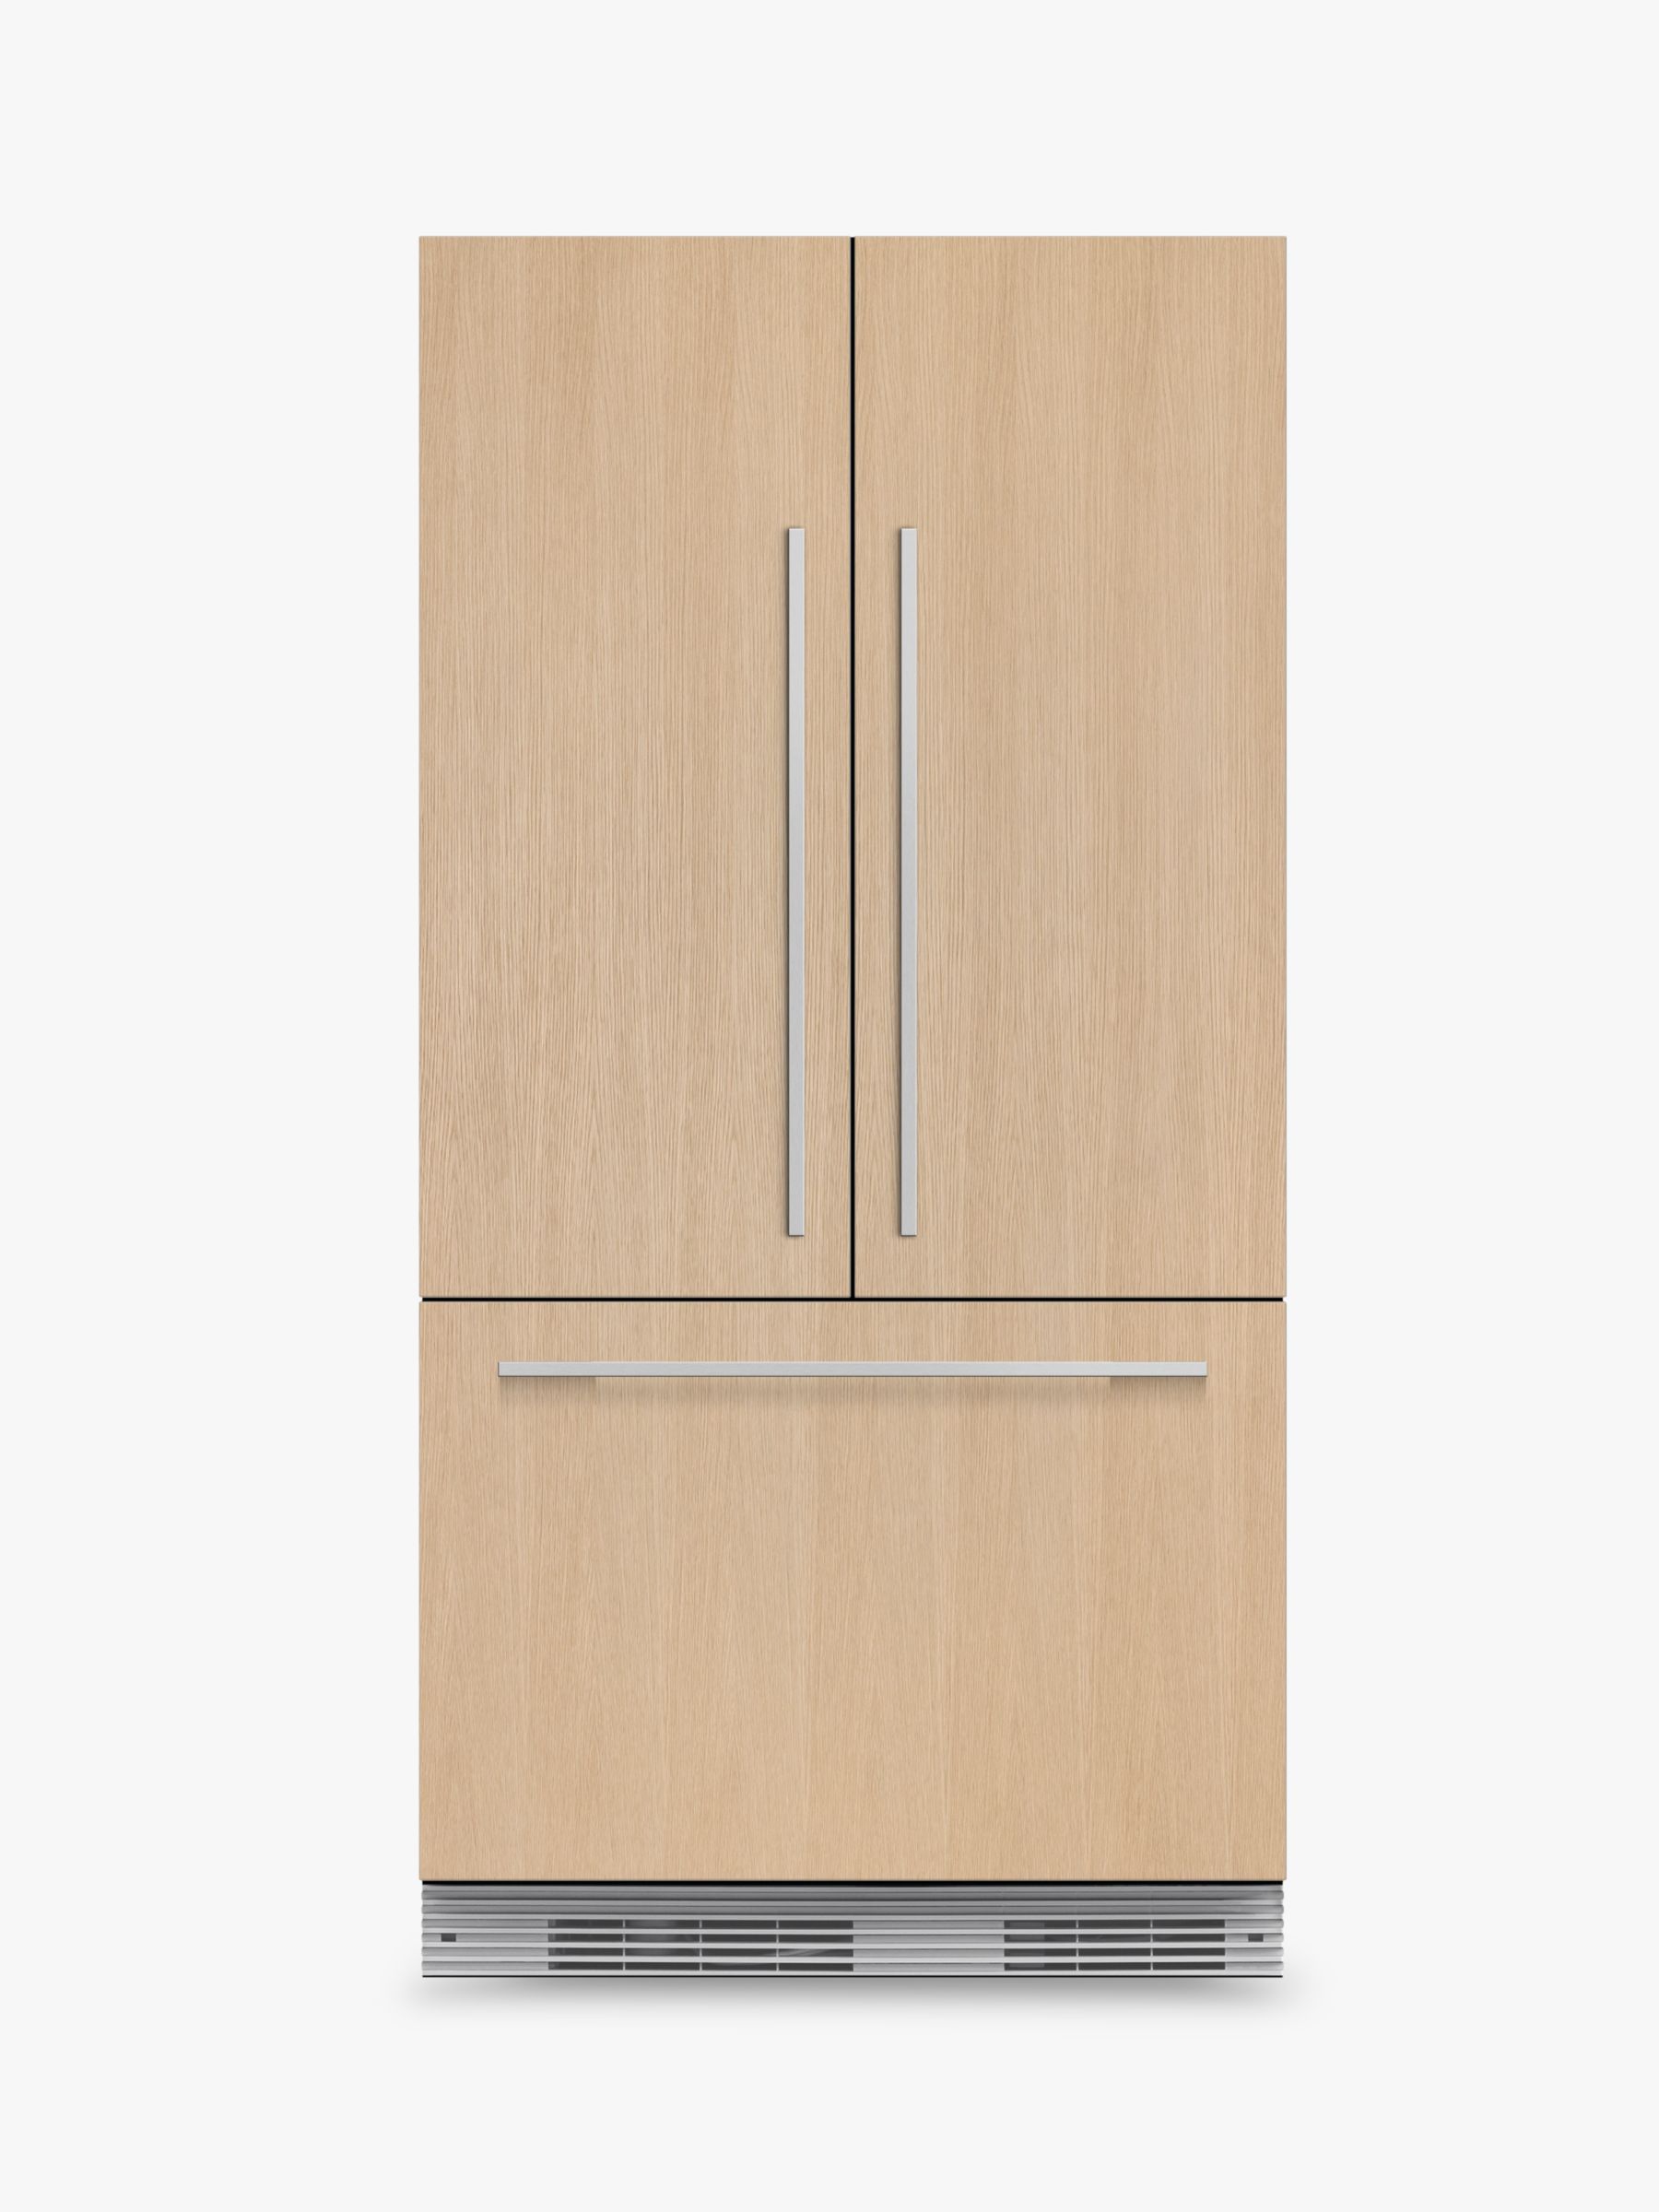 Fisher & Paykel RS90AU1 Integrated Fridge Freezer, A+ Energy Rating, 90cm Wide